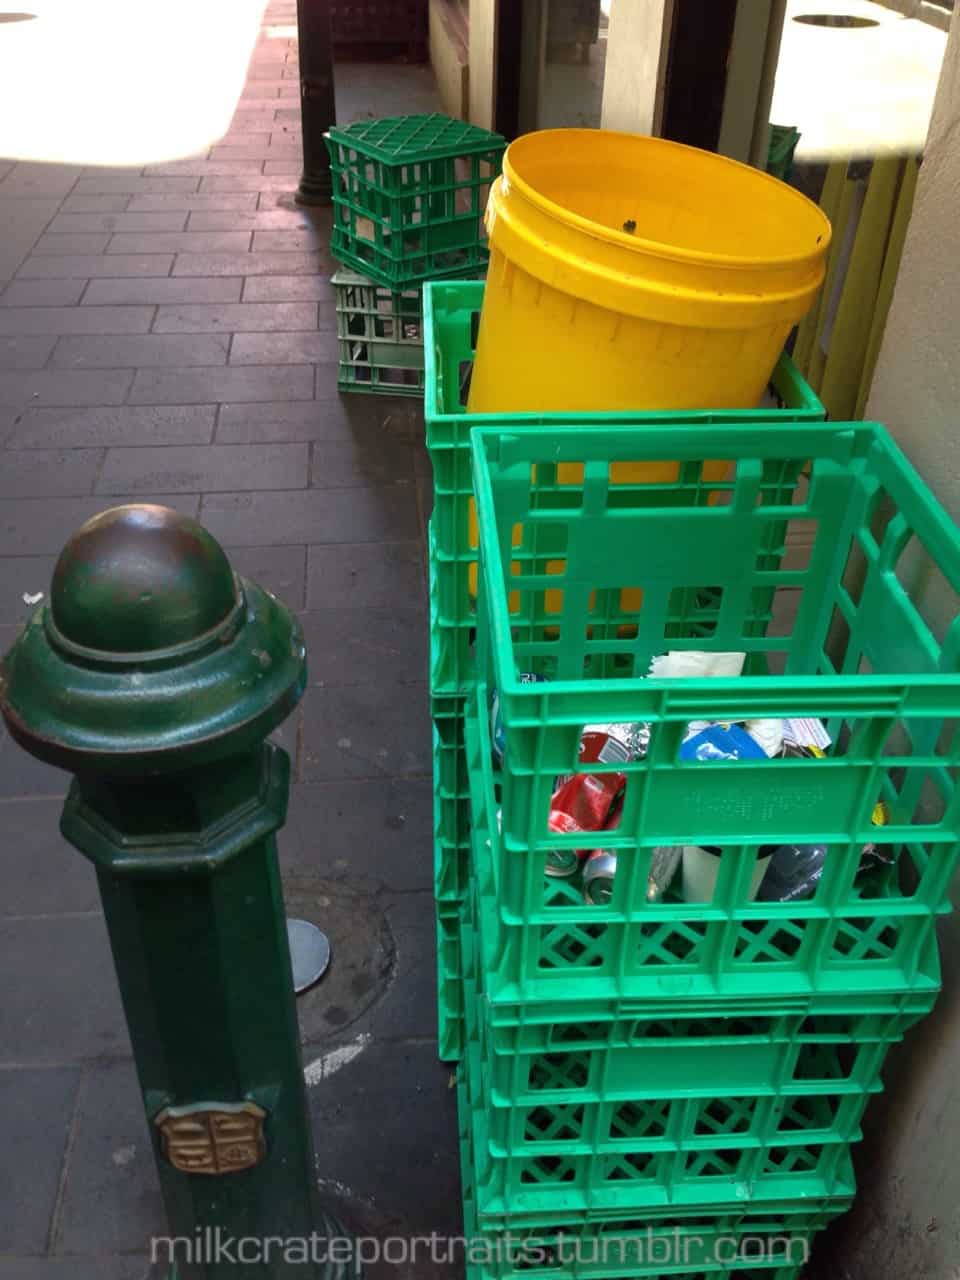 Green crates in the rubbish